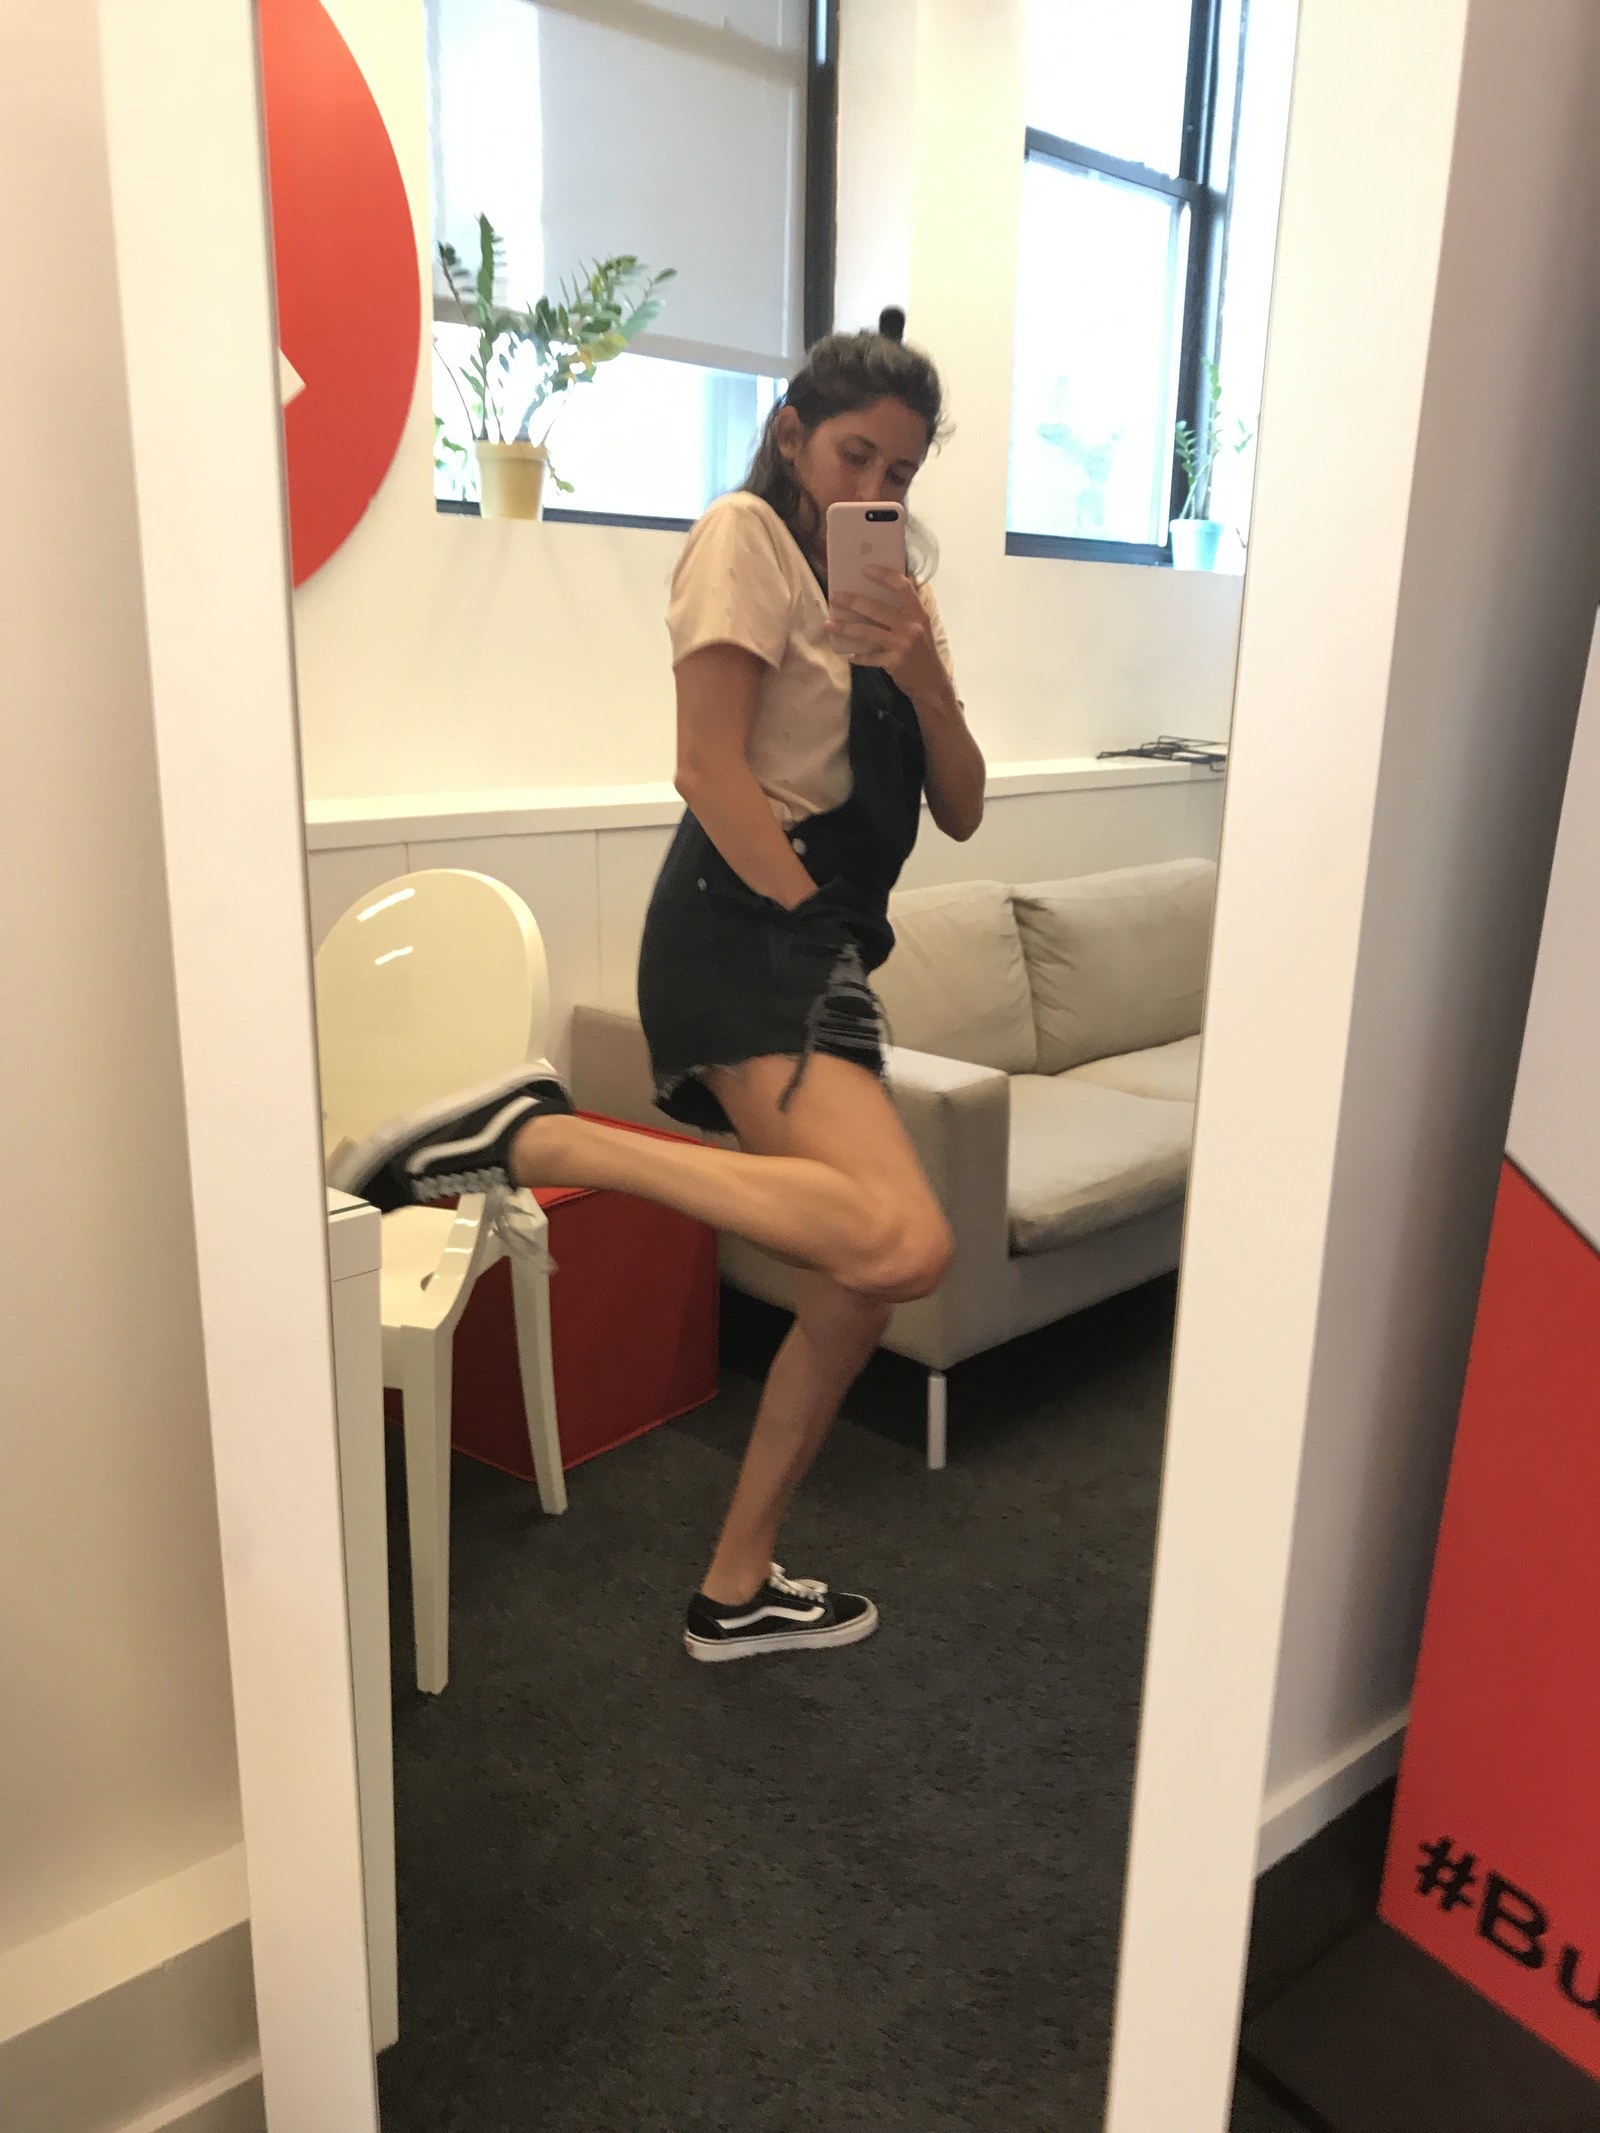 12 Poses To Get The Best Mirror Selfie - Society19